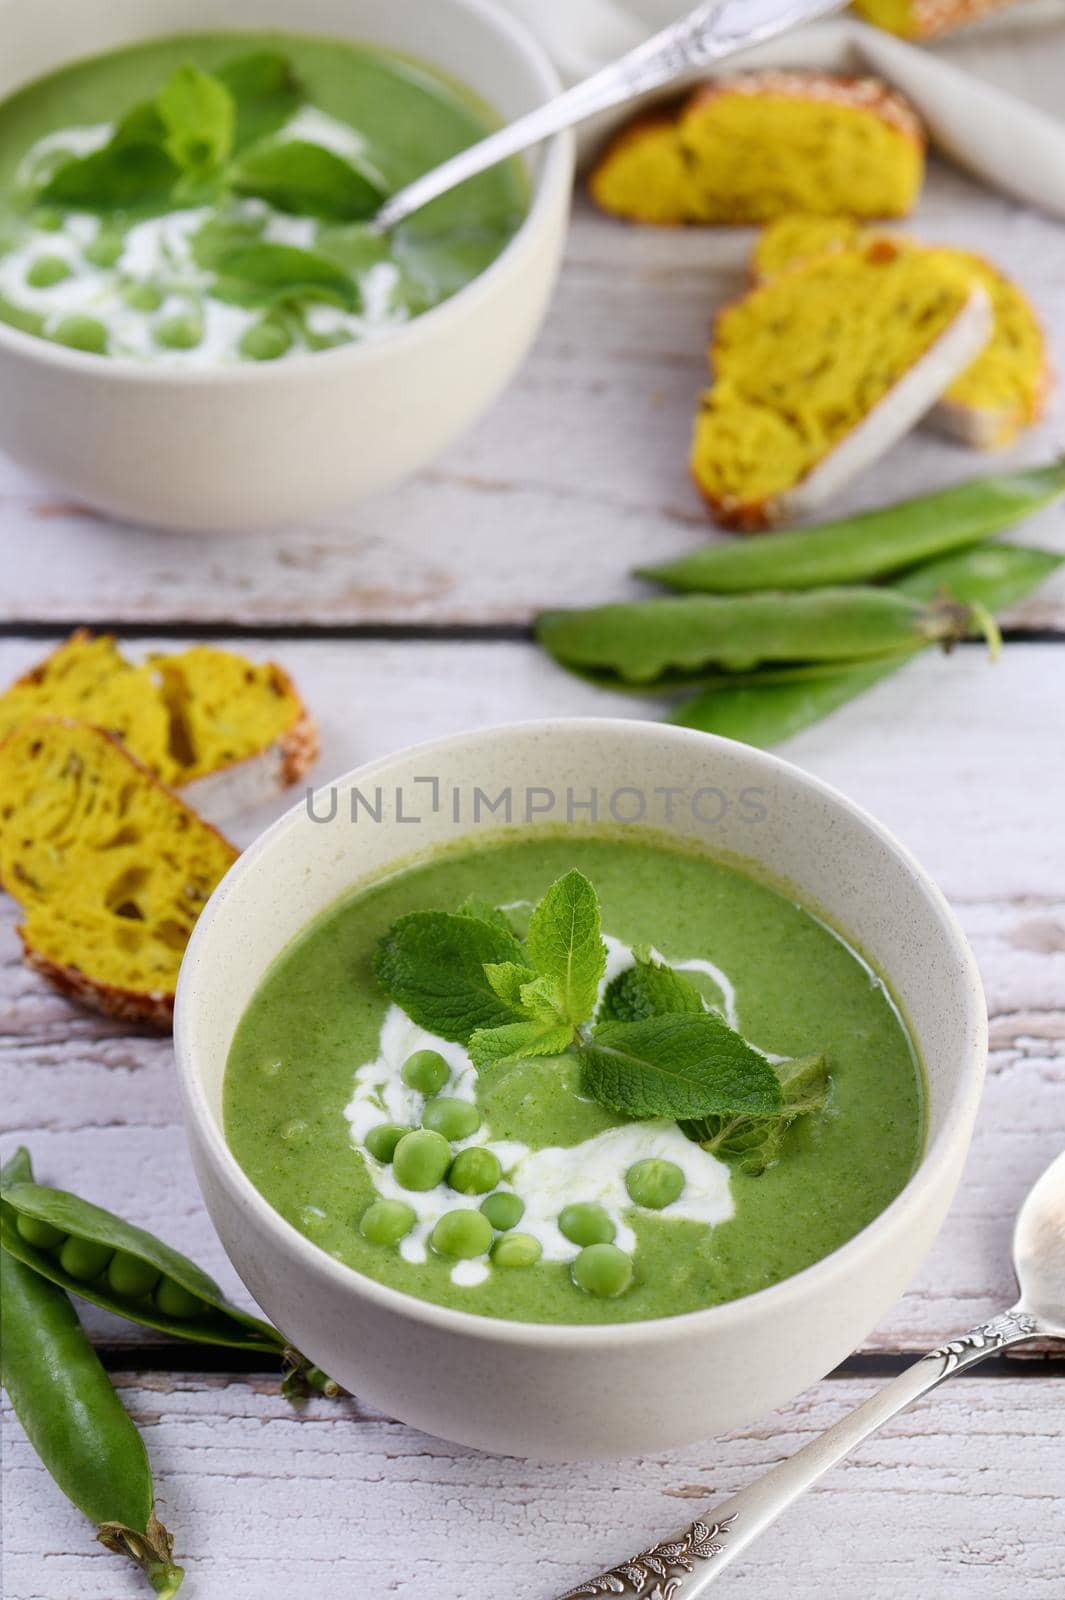 Chilled pea soup by Apolonia